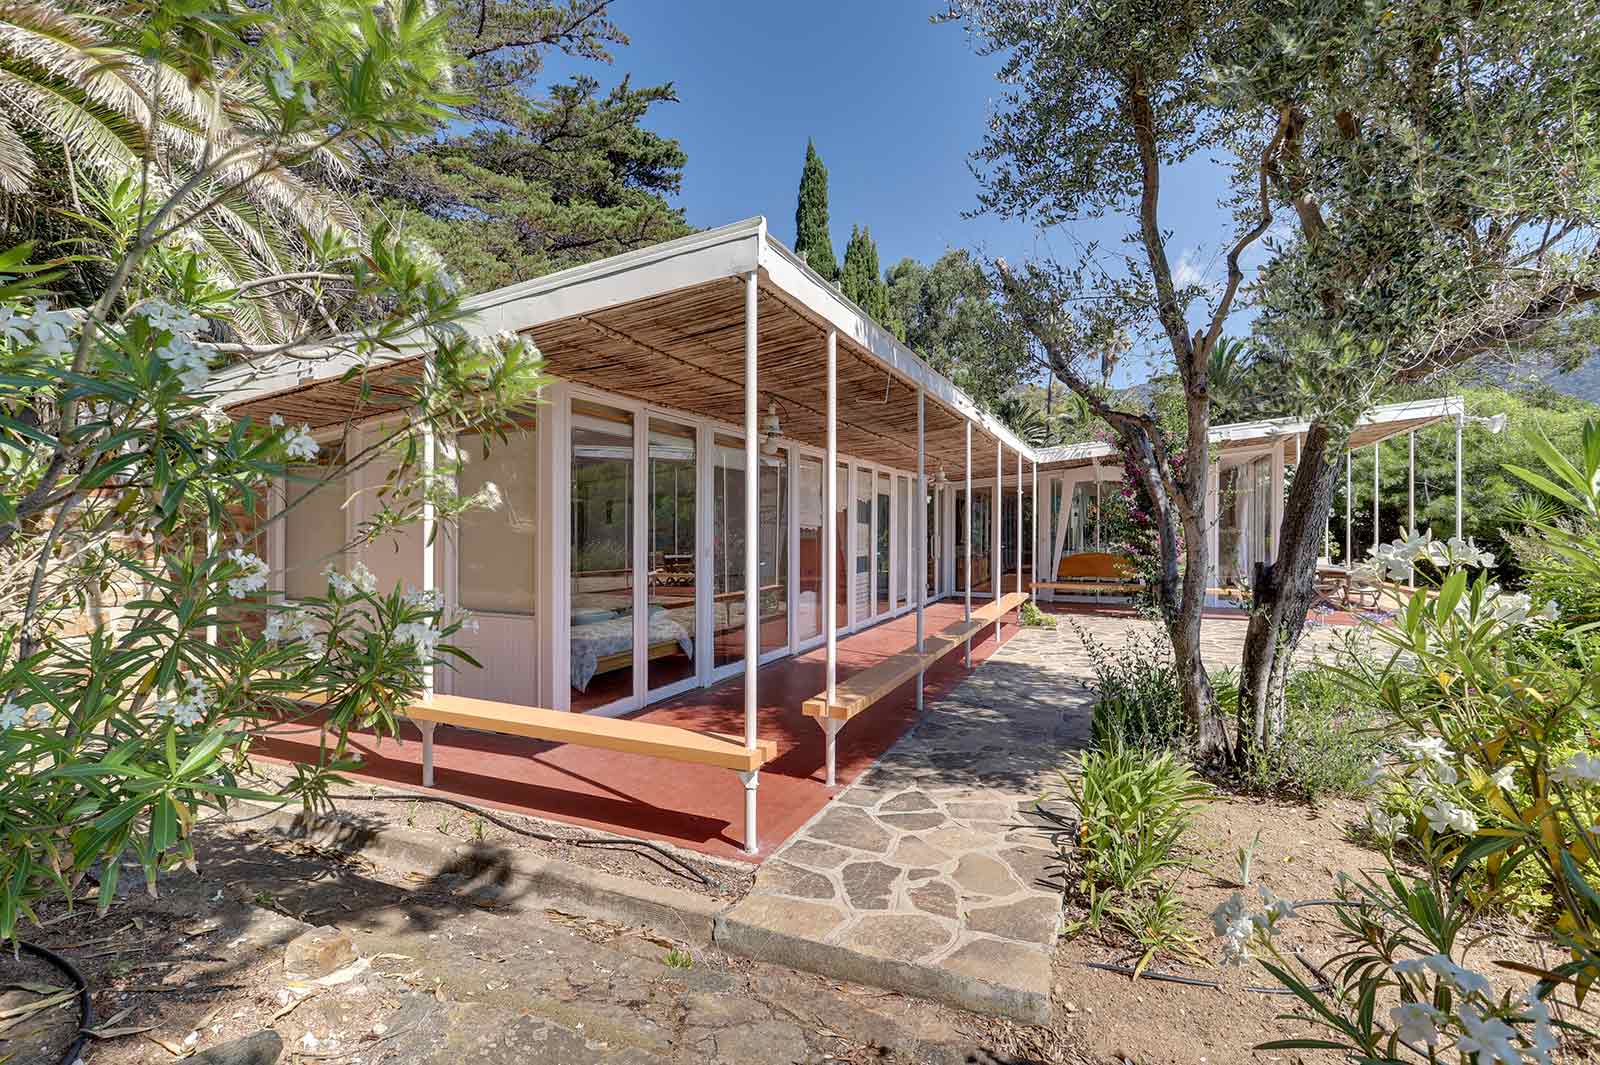 Villa Dollander for sale on the Cote d'Azur was designed by the Prouve brothers